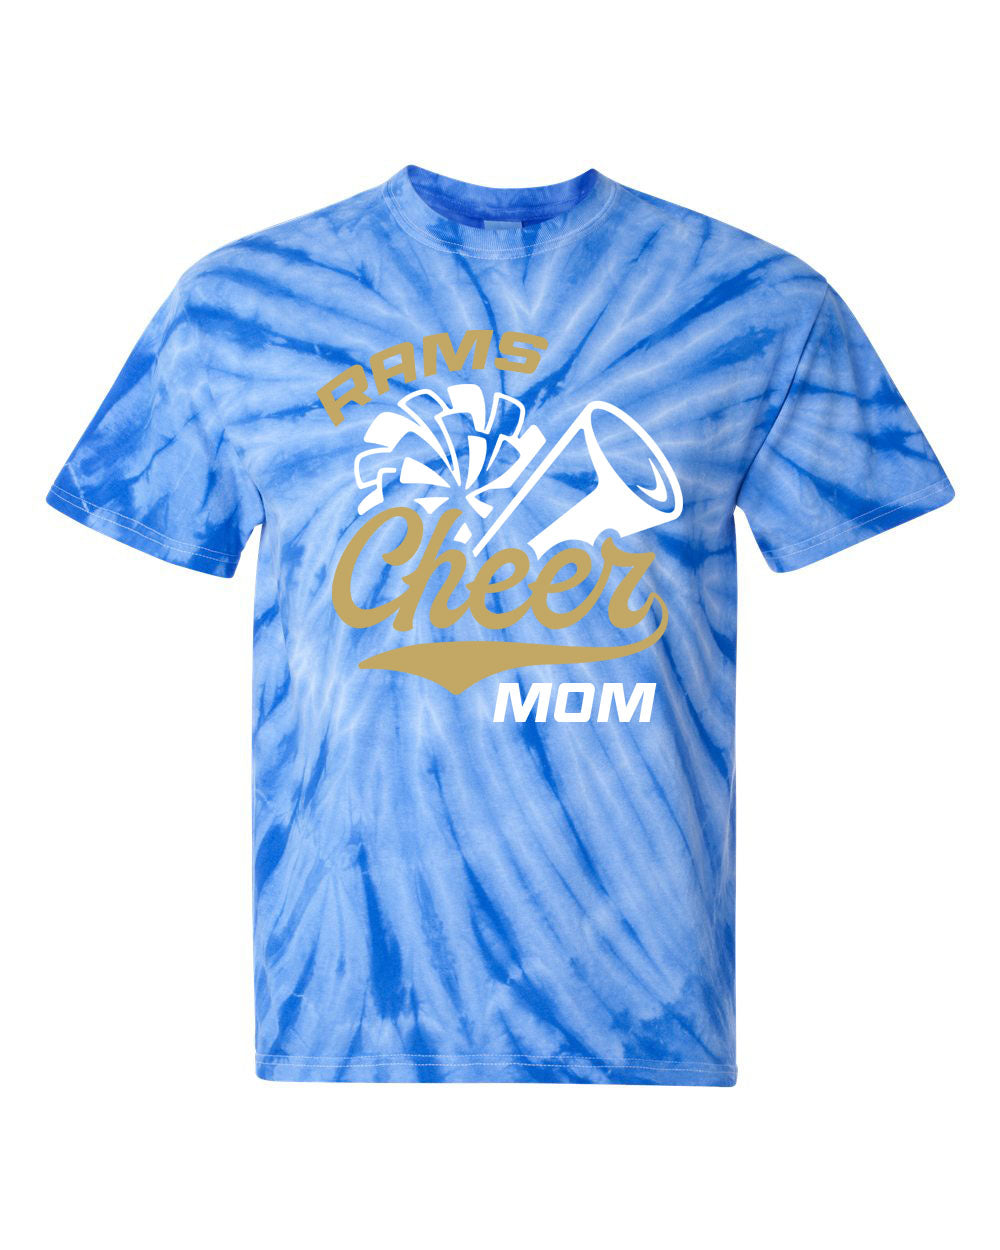 Sussex Middle Cheer Tie Dye t-shirt Design 1